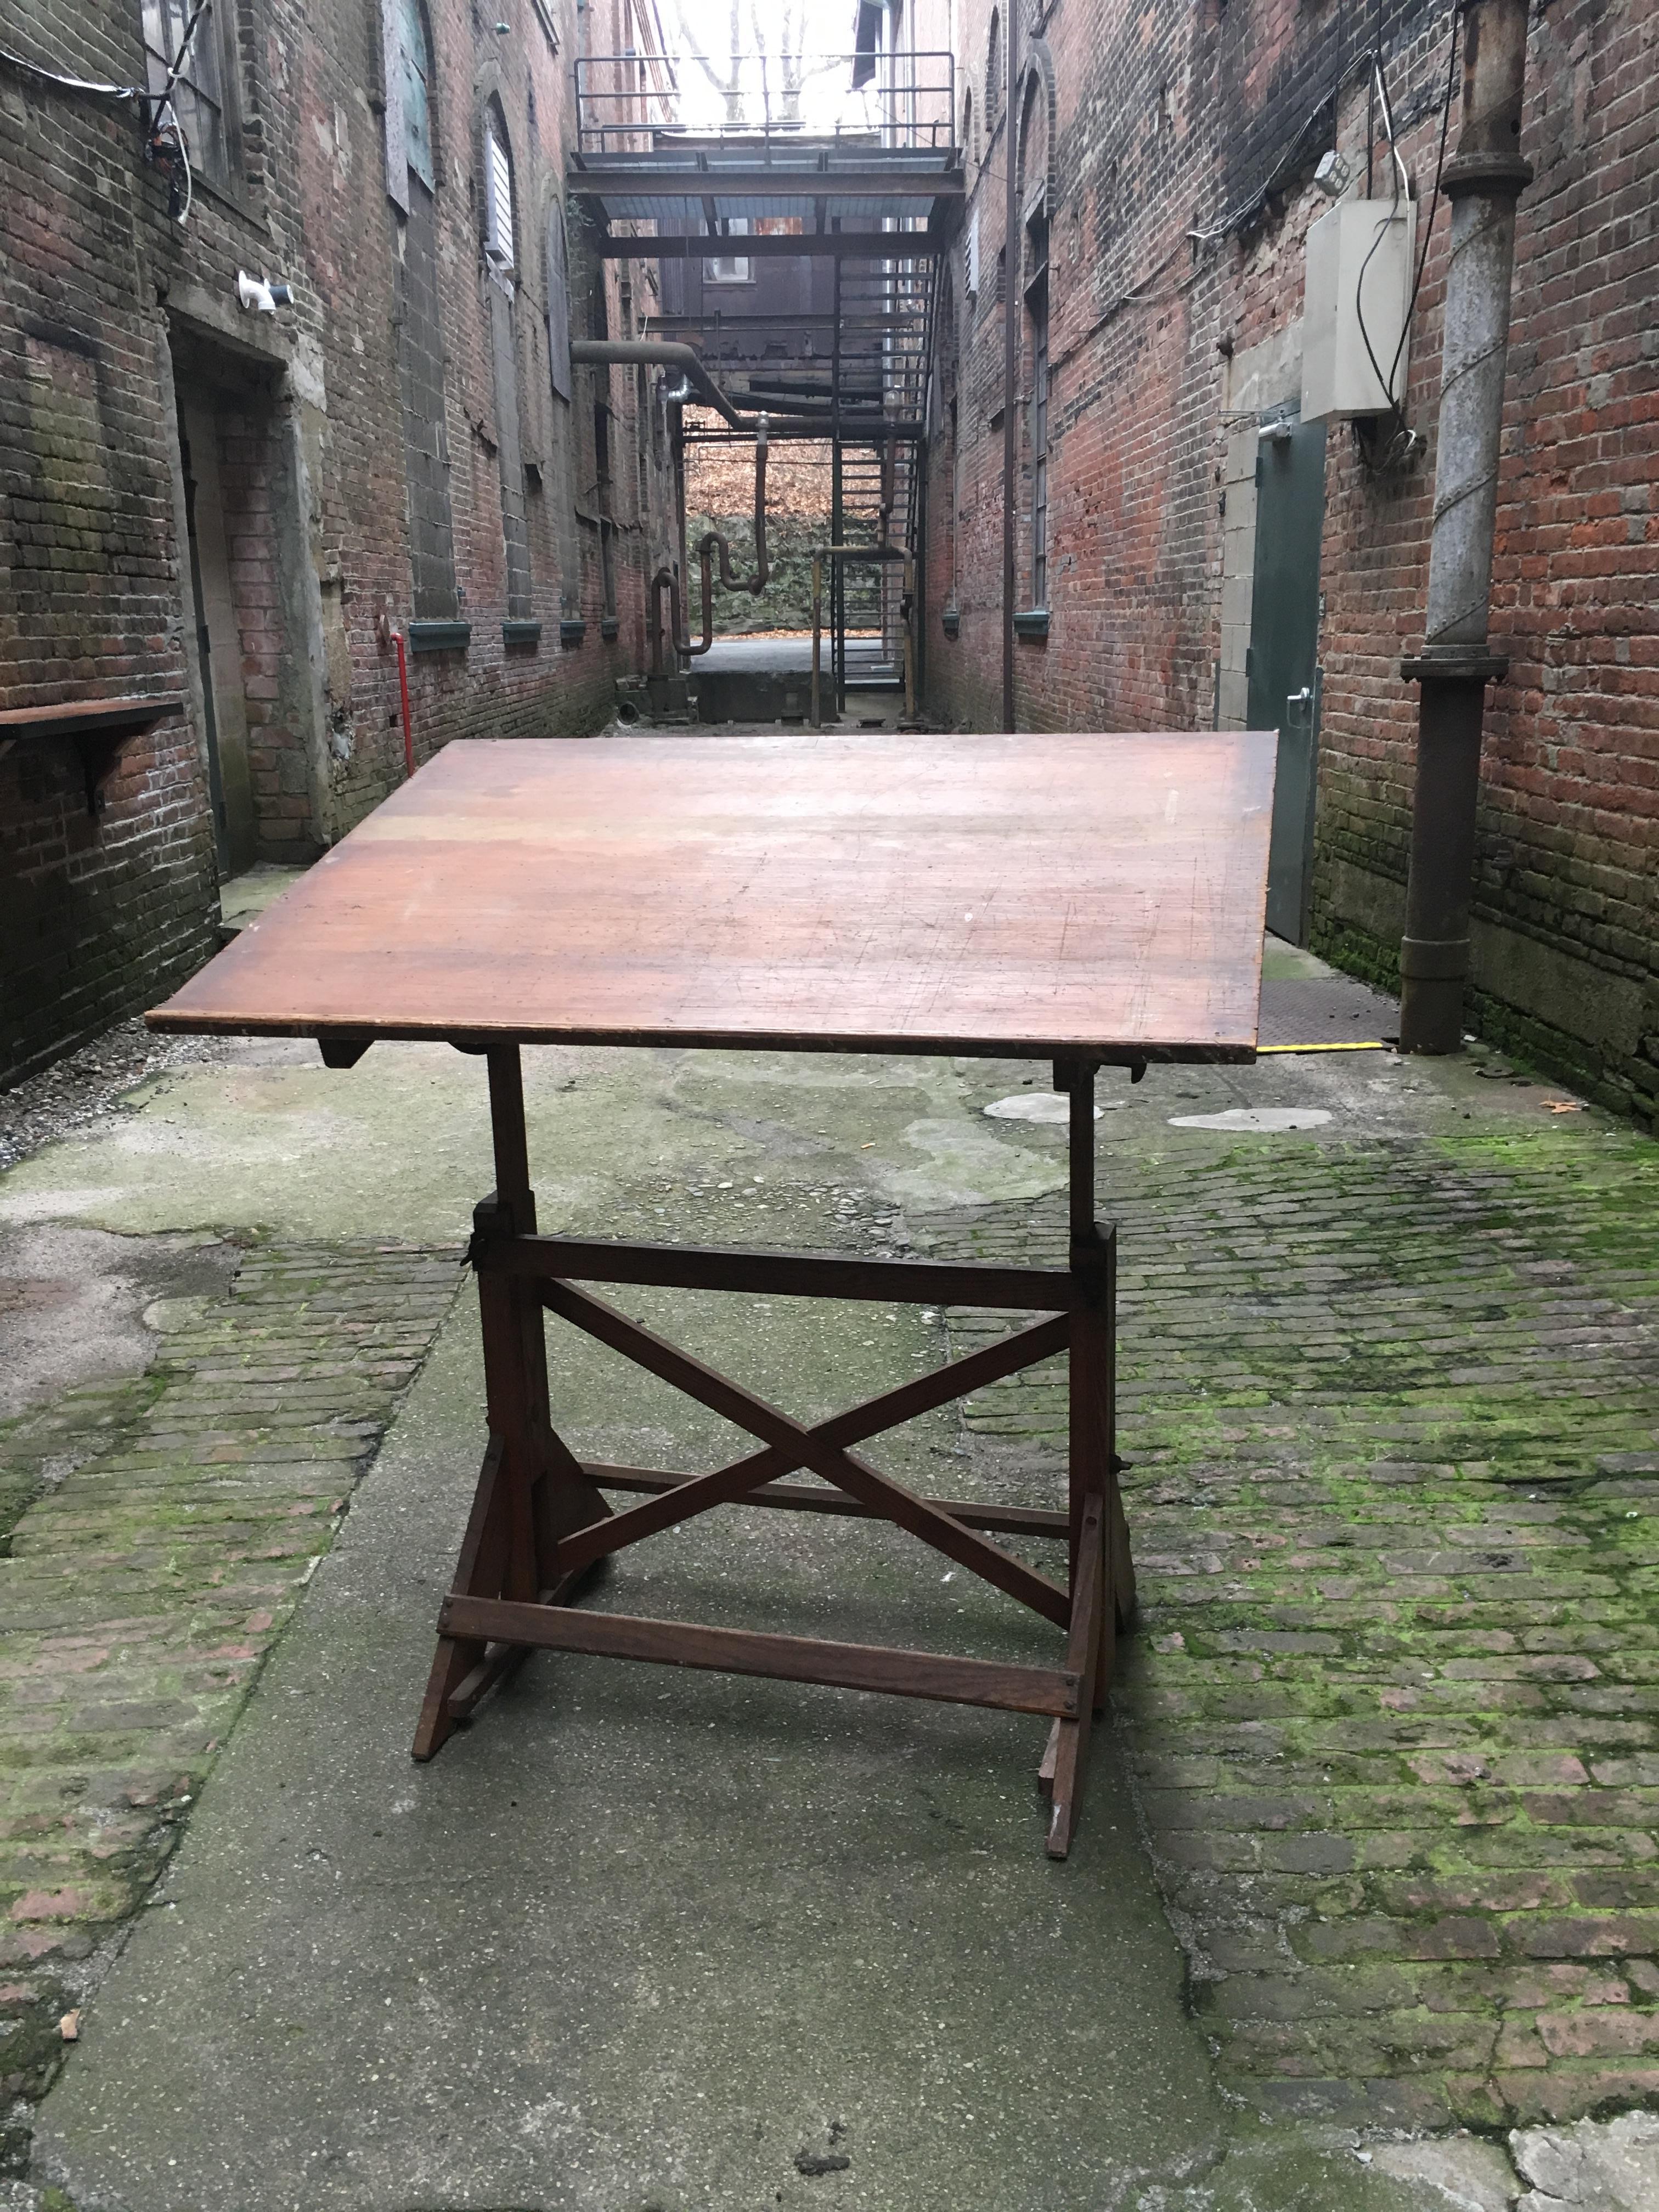 Fully adjustable height and angle. Featuring a solid oak base with pine work surface and iron hardware. The drafting table comes from the estate of marine, landscape and illustrator, Anton Otto Fischer, Woodstock, NY. Wonderful patina and overall